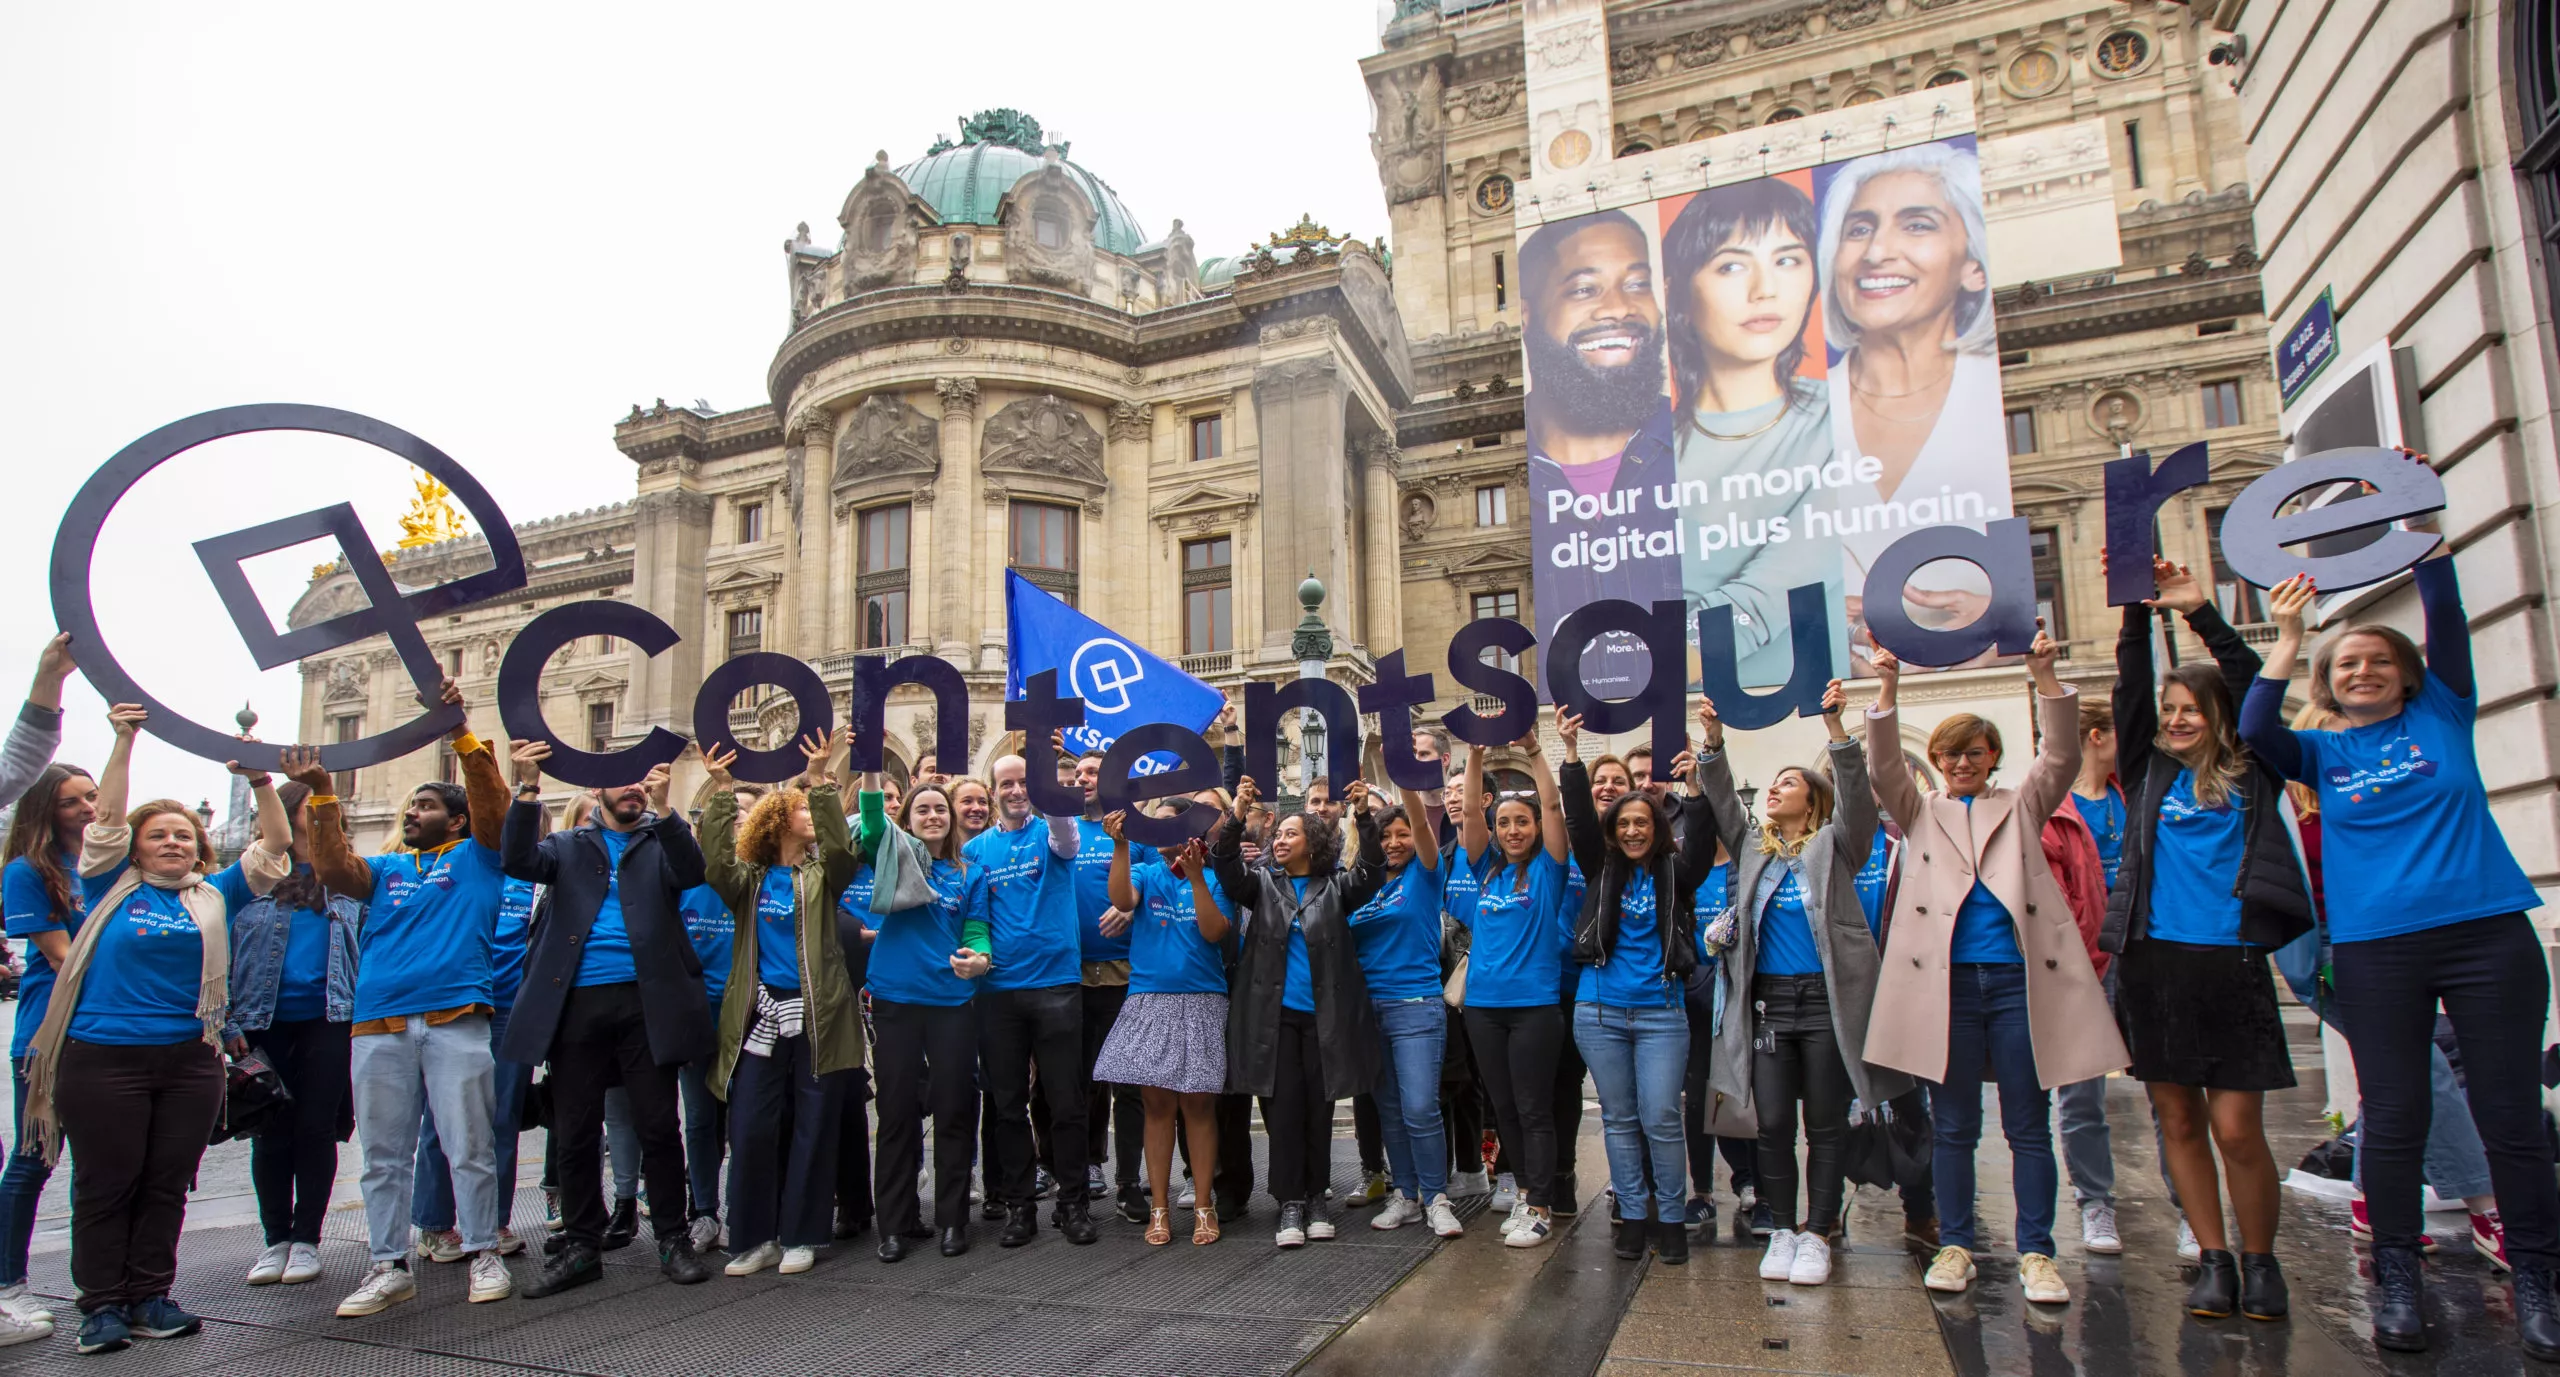 Contentsquare employees holding our logo above their heads in front of an advertisement banner in paris france